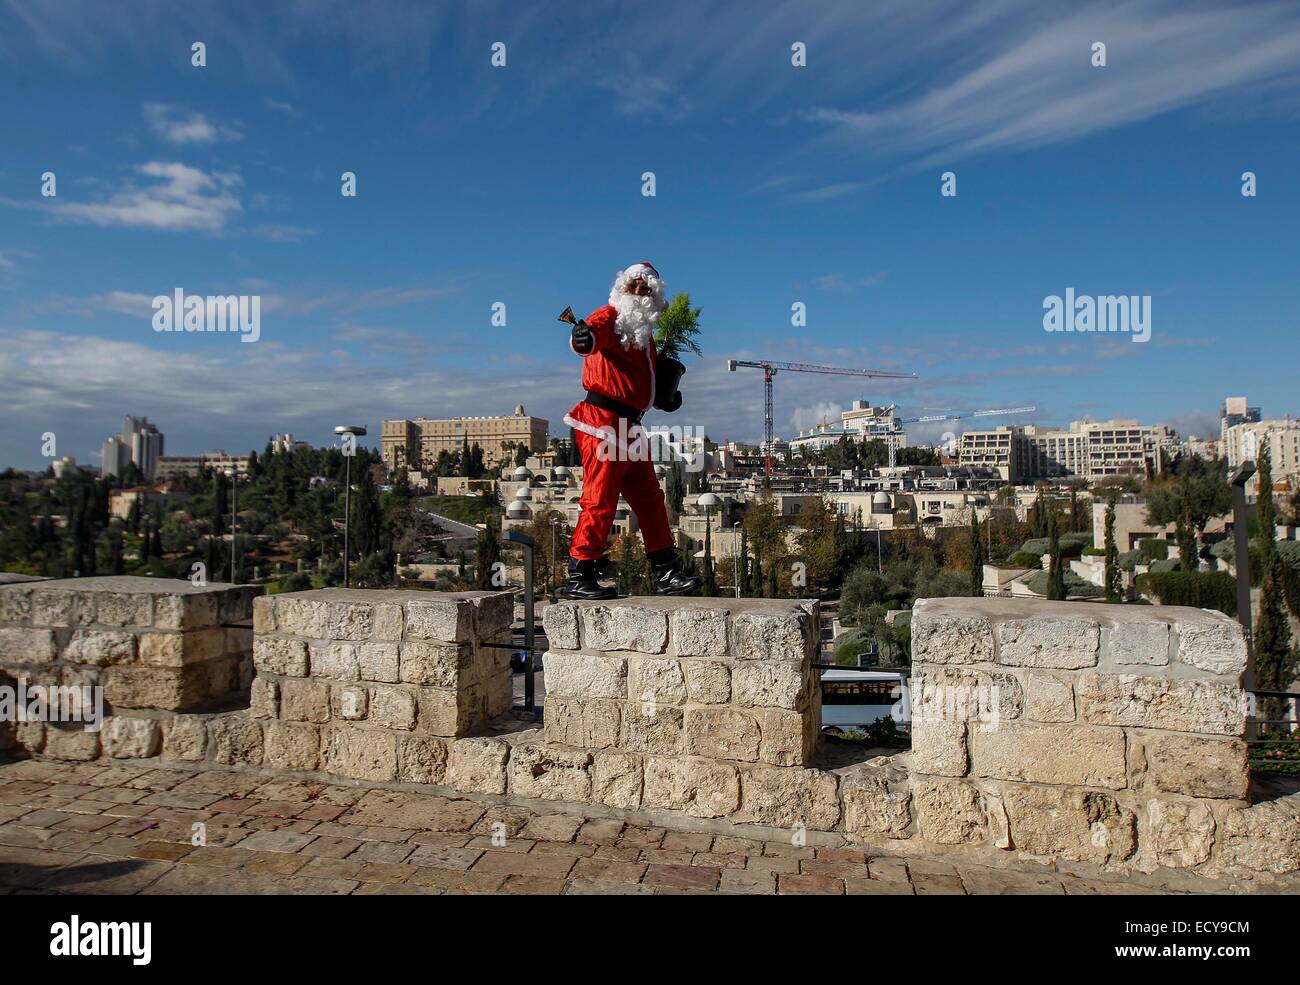 Jerusalem. 22nd Dec, 2014. Palestinian Issa Kassissieh dressed as Santa Claus stands on the wall of the Old City in Jerusalem, ahead of Christmas, on Dec. 22, 2014. Credit:  Muammar Awad/Xinhua/Alamy Live News Stock Photo